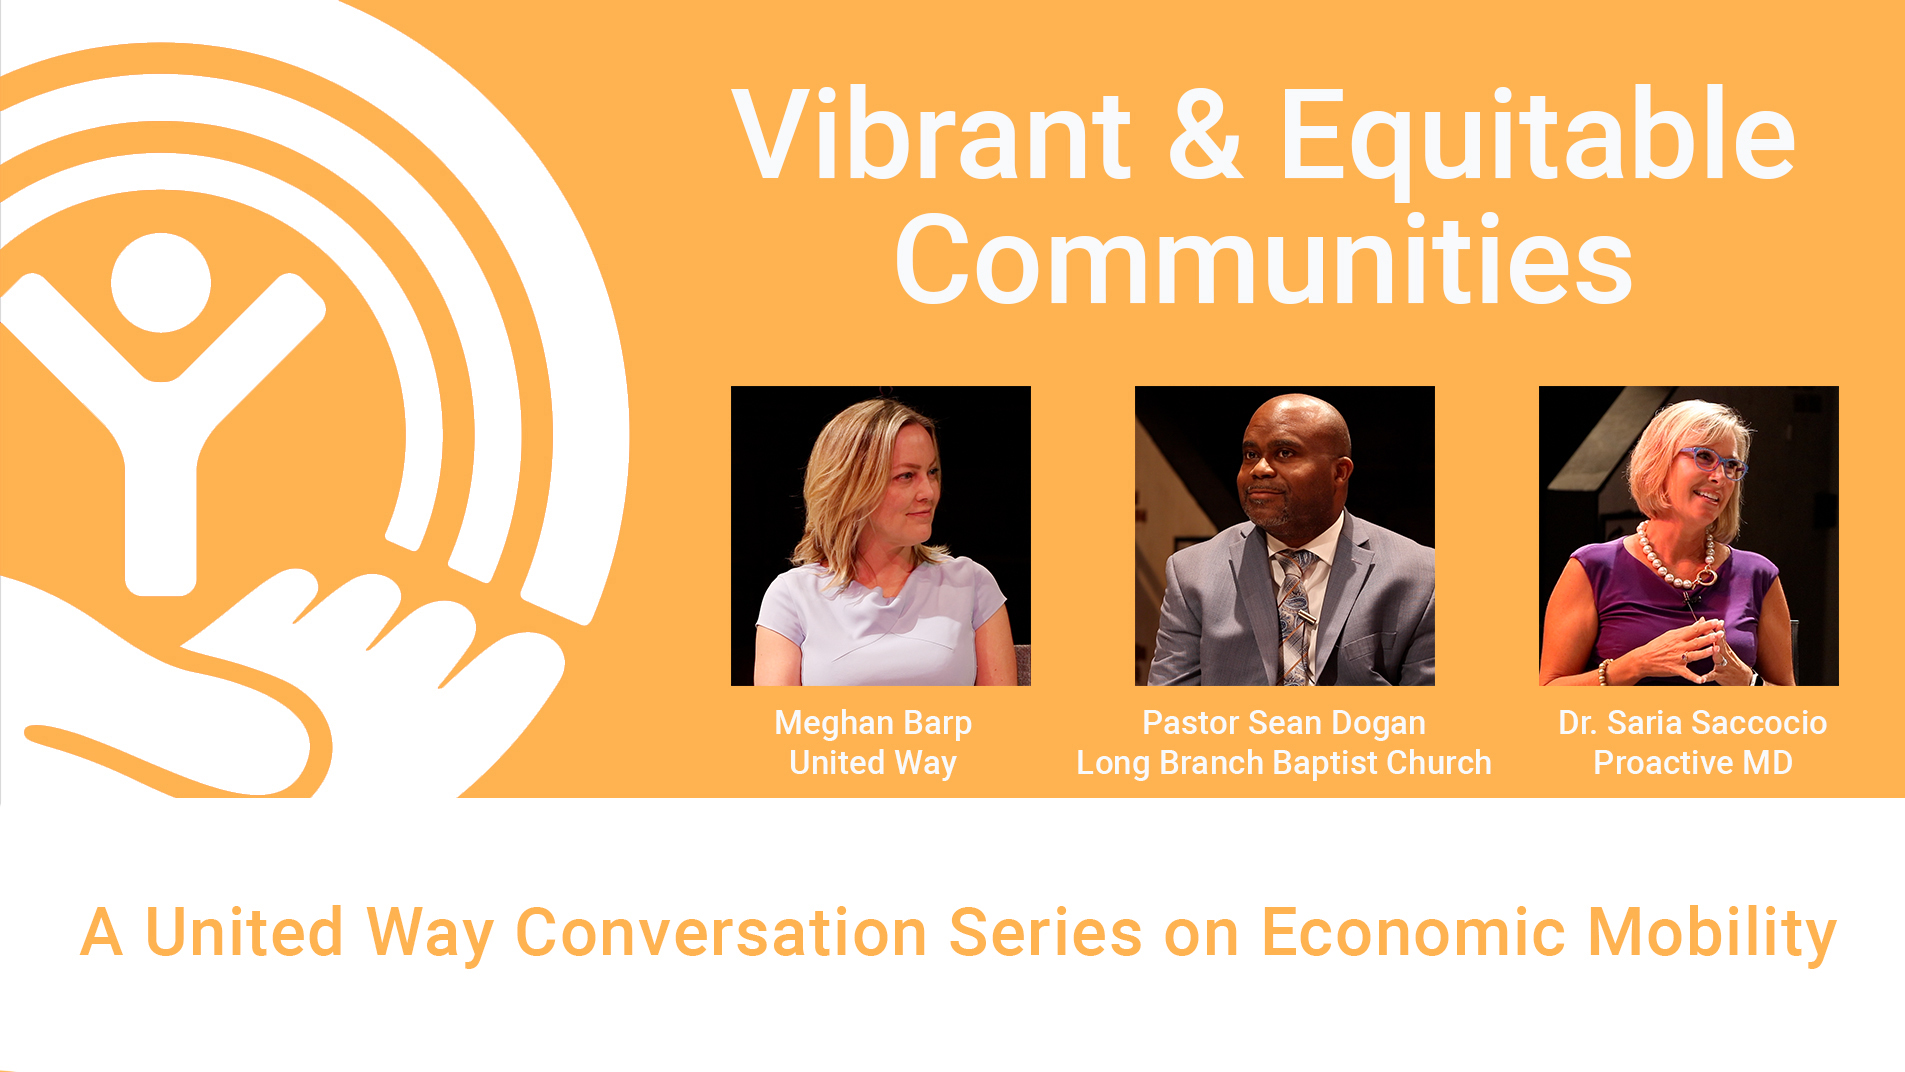 United Way Conversation Series: Ensuring All of Greenville County is Vibrant & Equitable